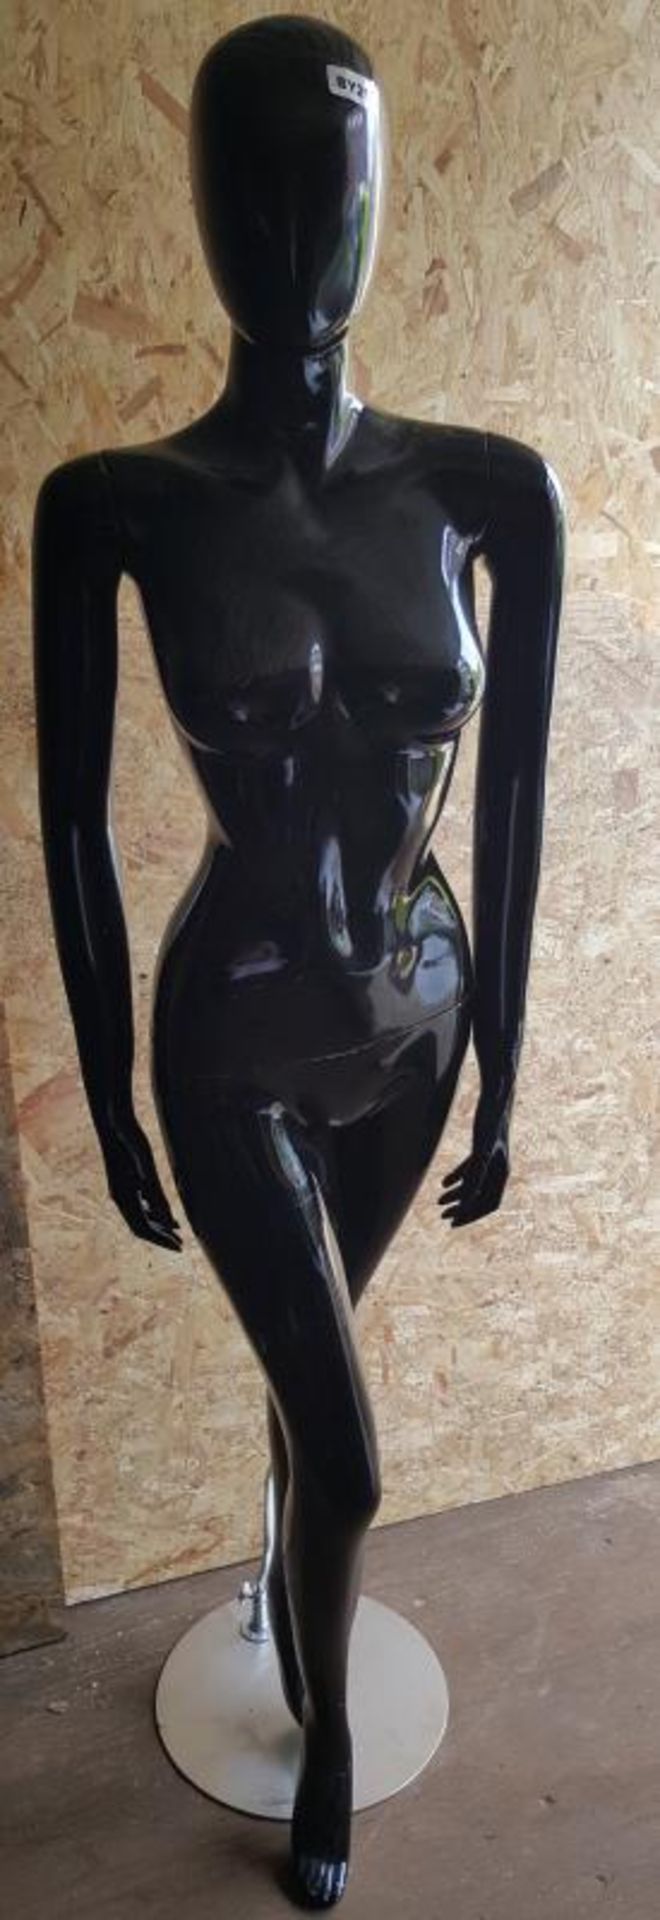 1 x 6ft Female Shop&nbsp;Mannequin With A Gloss Black Finish&nbsp;- Ref BY292 - Dimensions: H183/L40